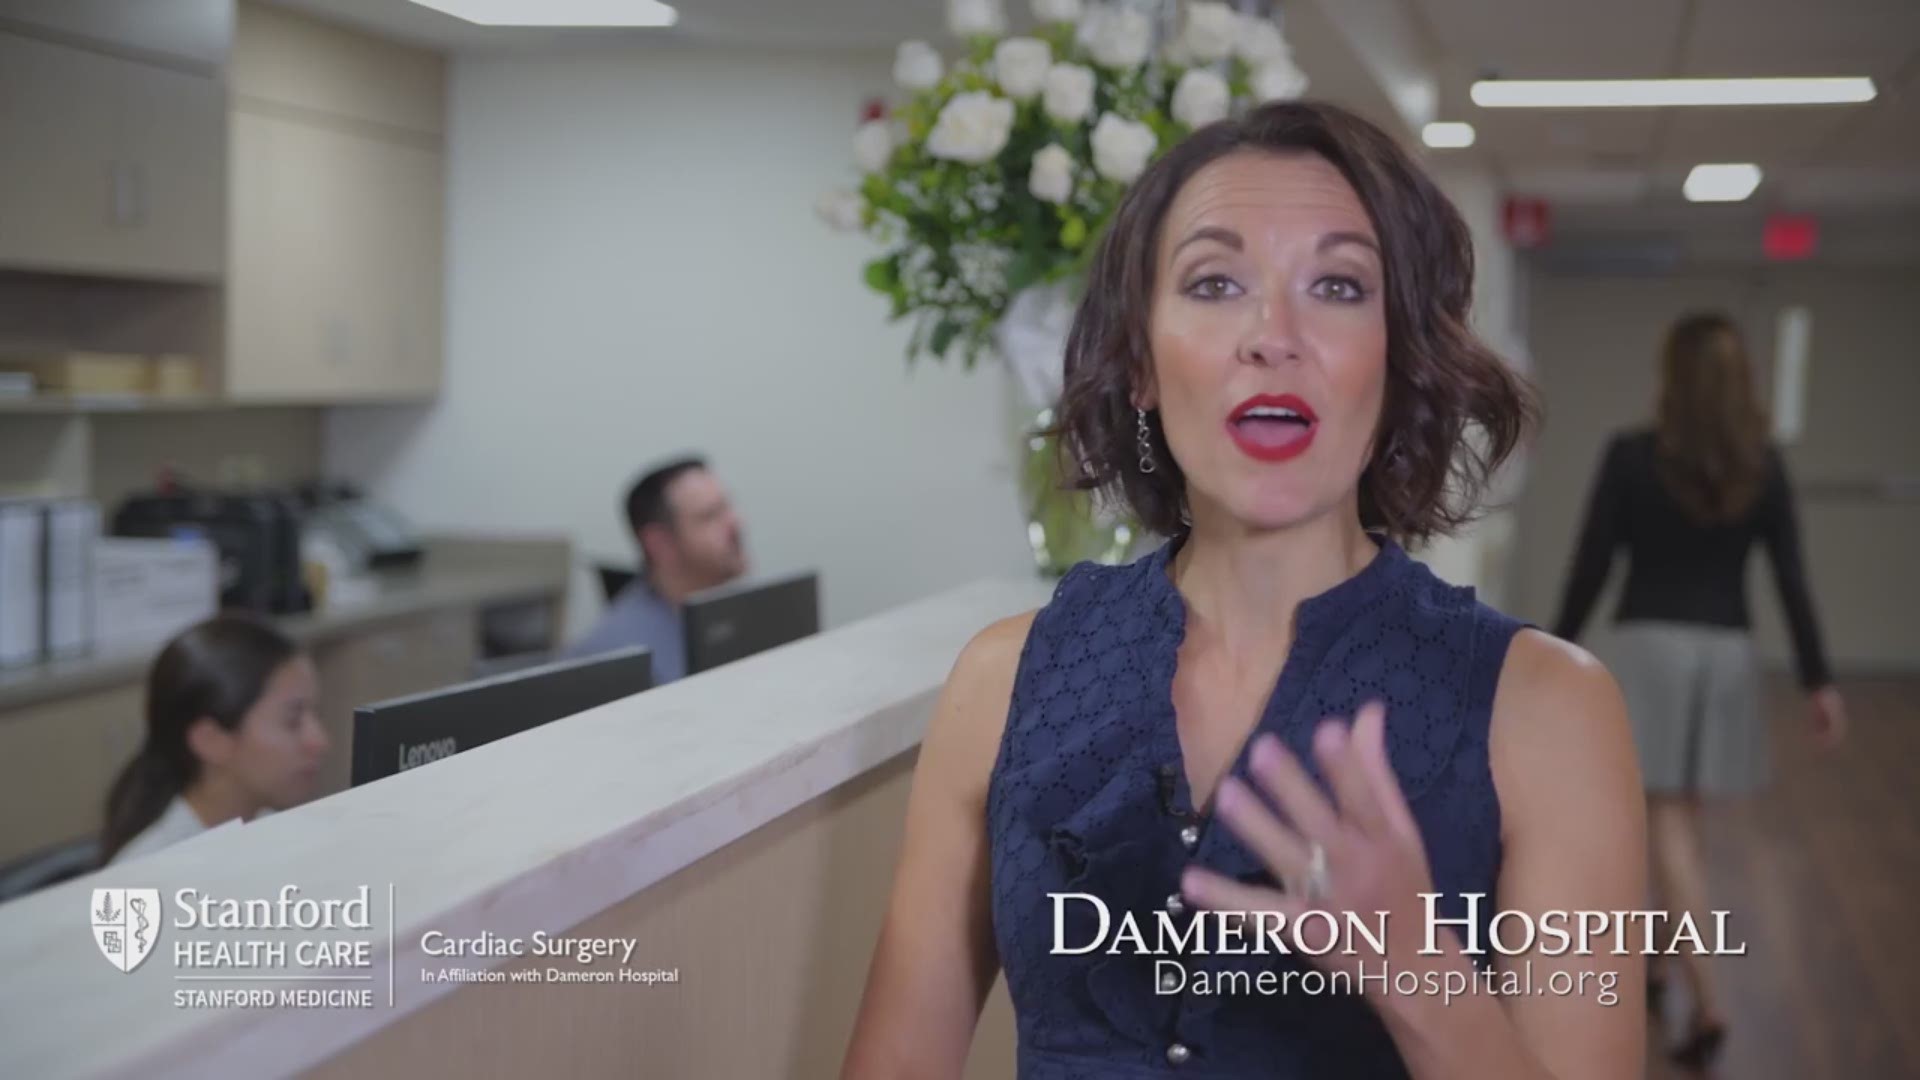 Medical Minute is sponsored by Dameron Hospital. Excellence in Cardiac Care.